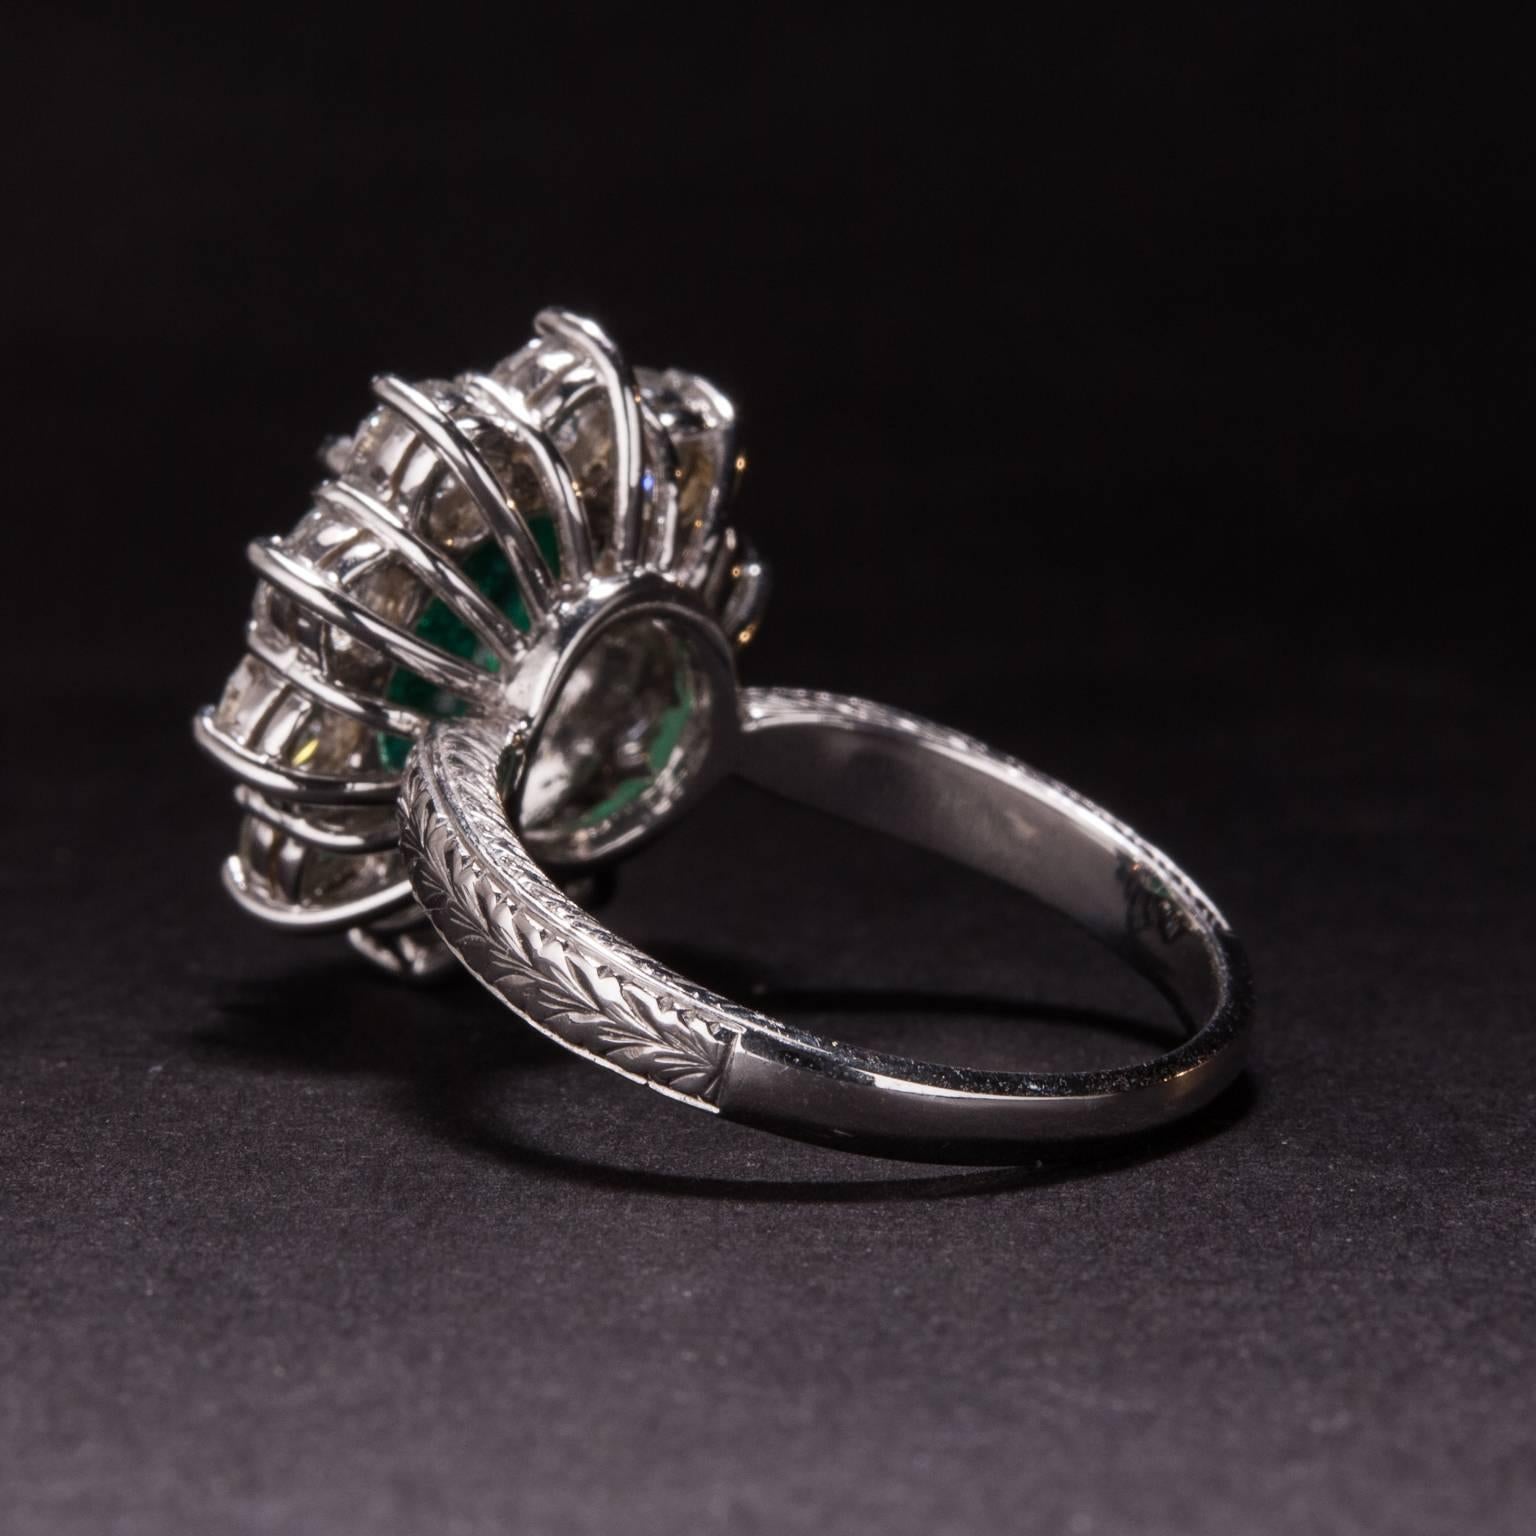 2.68 Carat Emerald Ring with Diamond Accents  In Excellent Condition For Sale In Carmel, CA